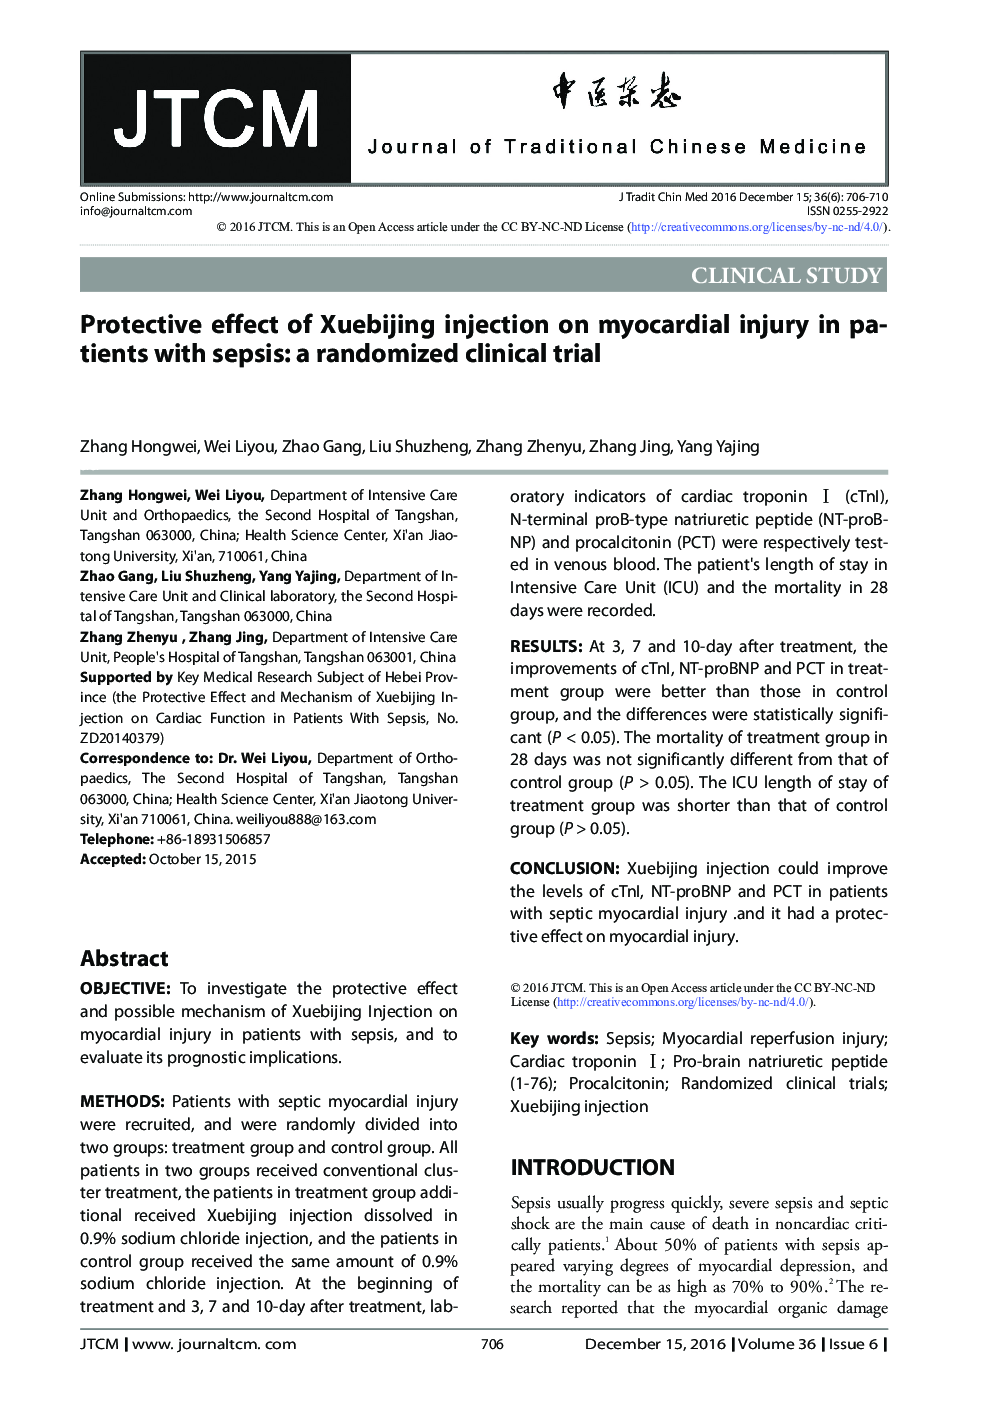 Protective effect of Xuebijing injection on myocardial injury in patients with sepsis: a randomized clinical trial